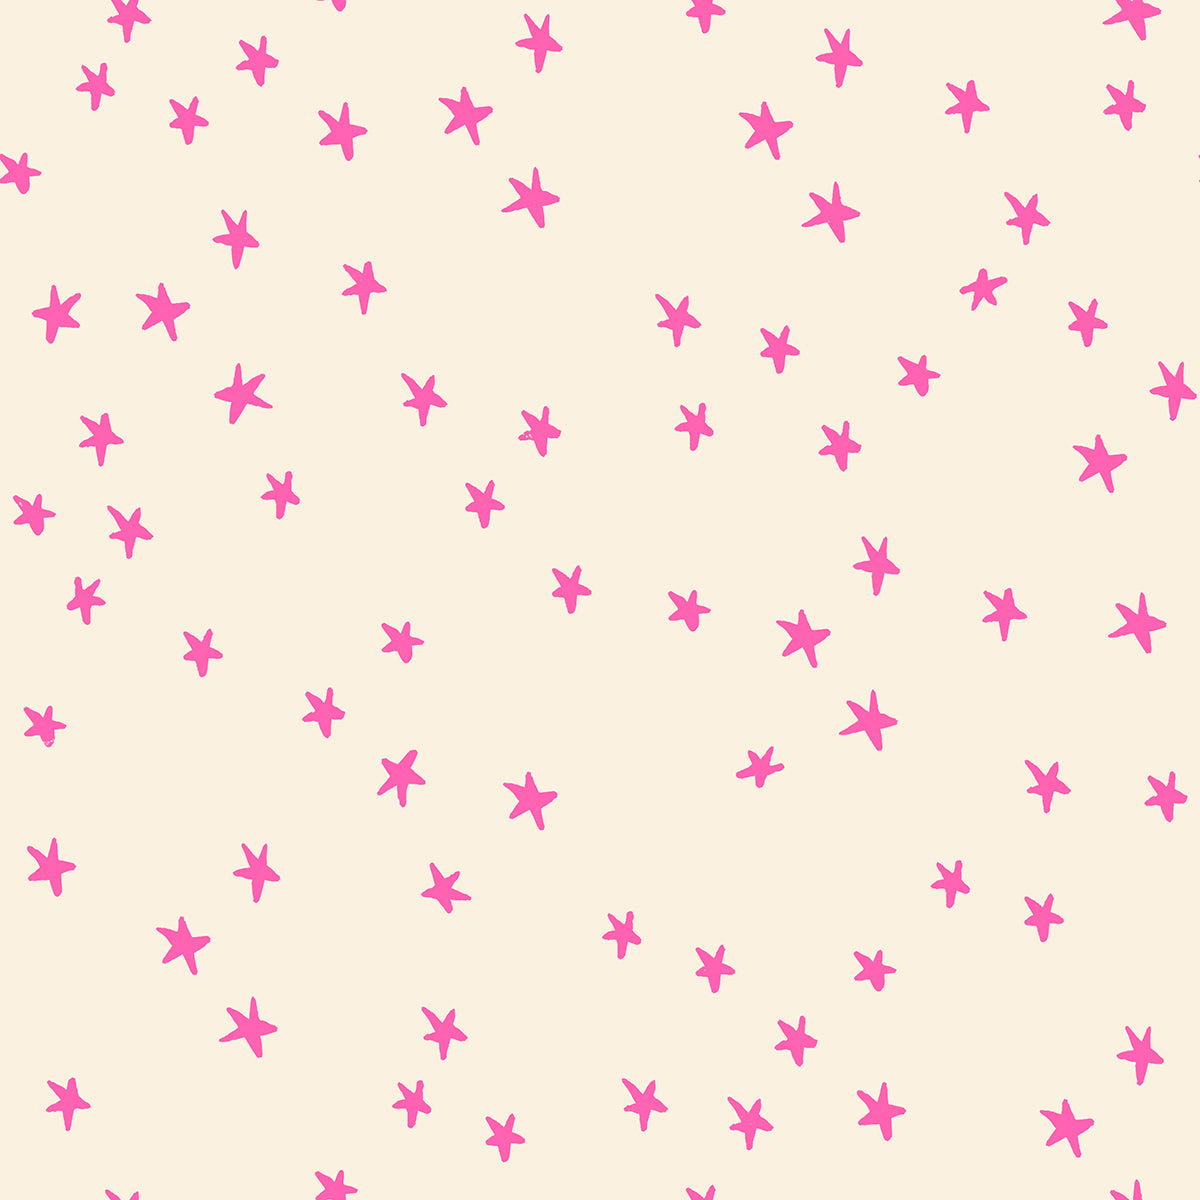 Starry by Alexia Abegg : Starry - Neon Pink RS4109 36